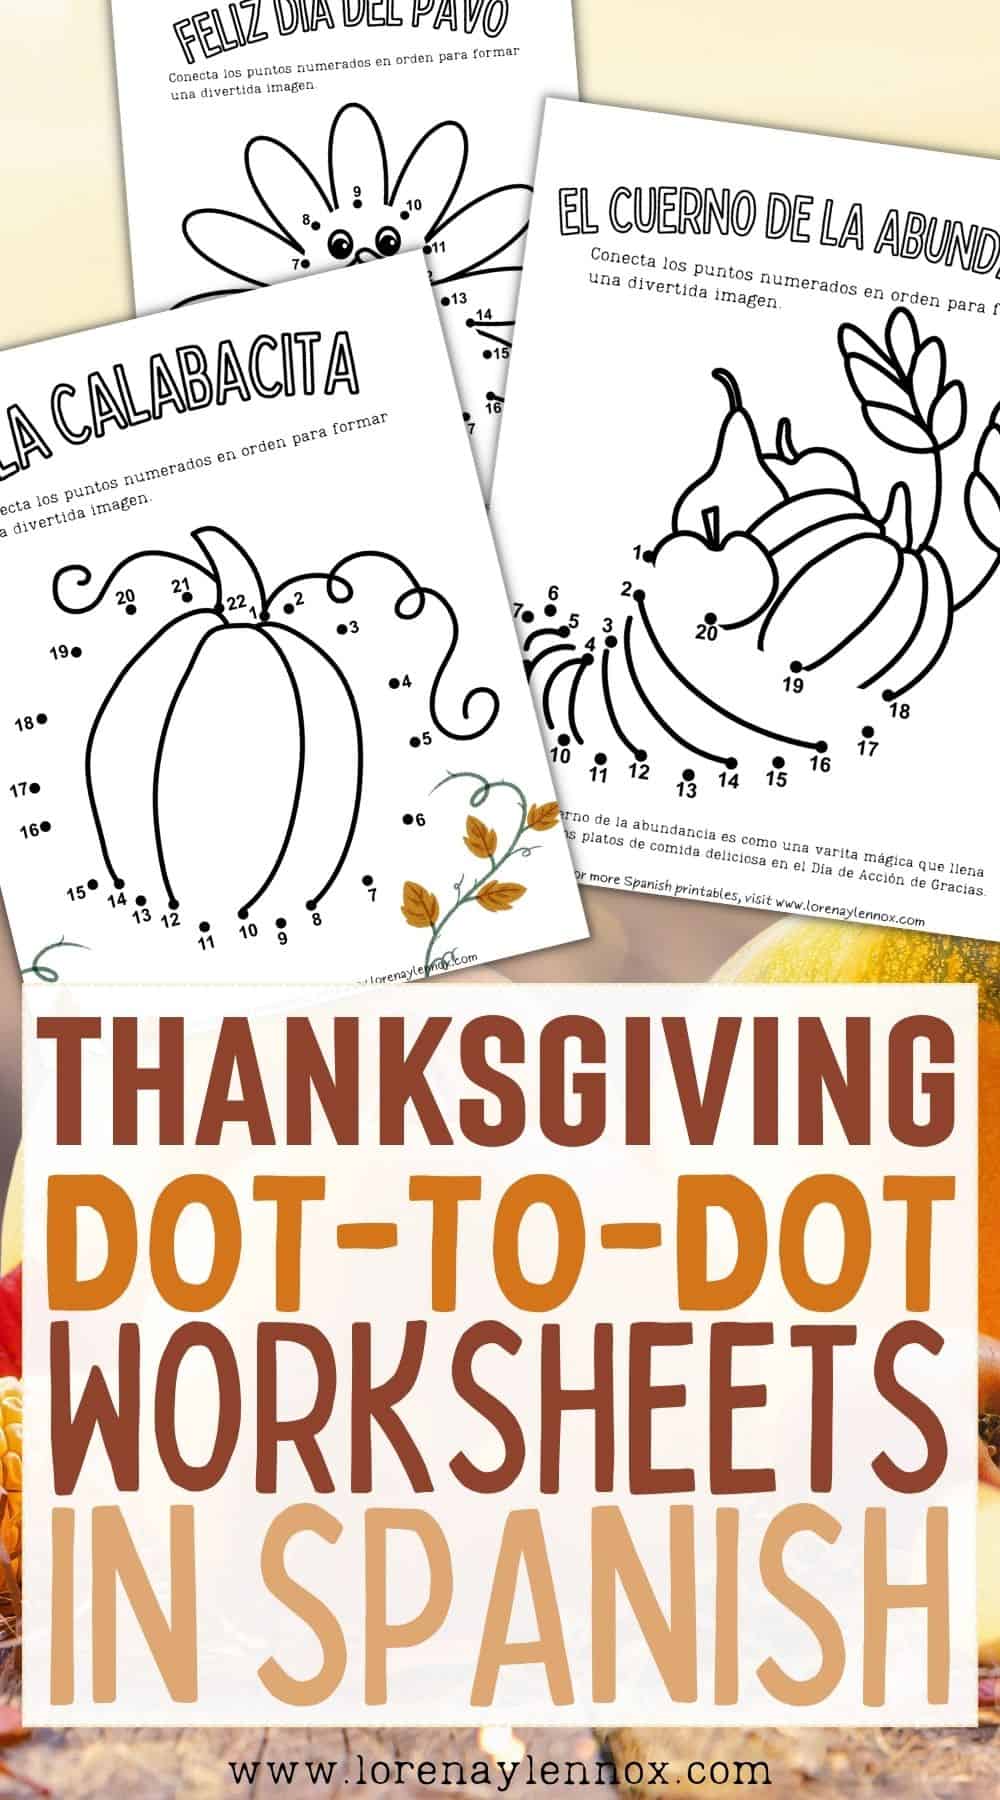 Fun Thanksgiving Dot-to-Dot Worksheets in Spanish! Connect the dots to reveal festive holiday images for your kids to enjoy. Perfect for language learning and Thanksgiving celebrations.